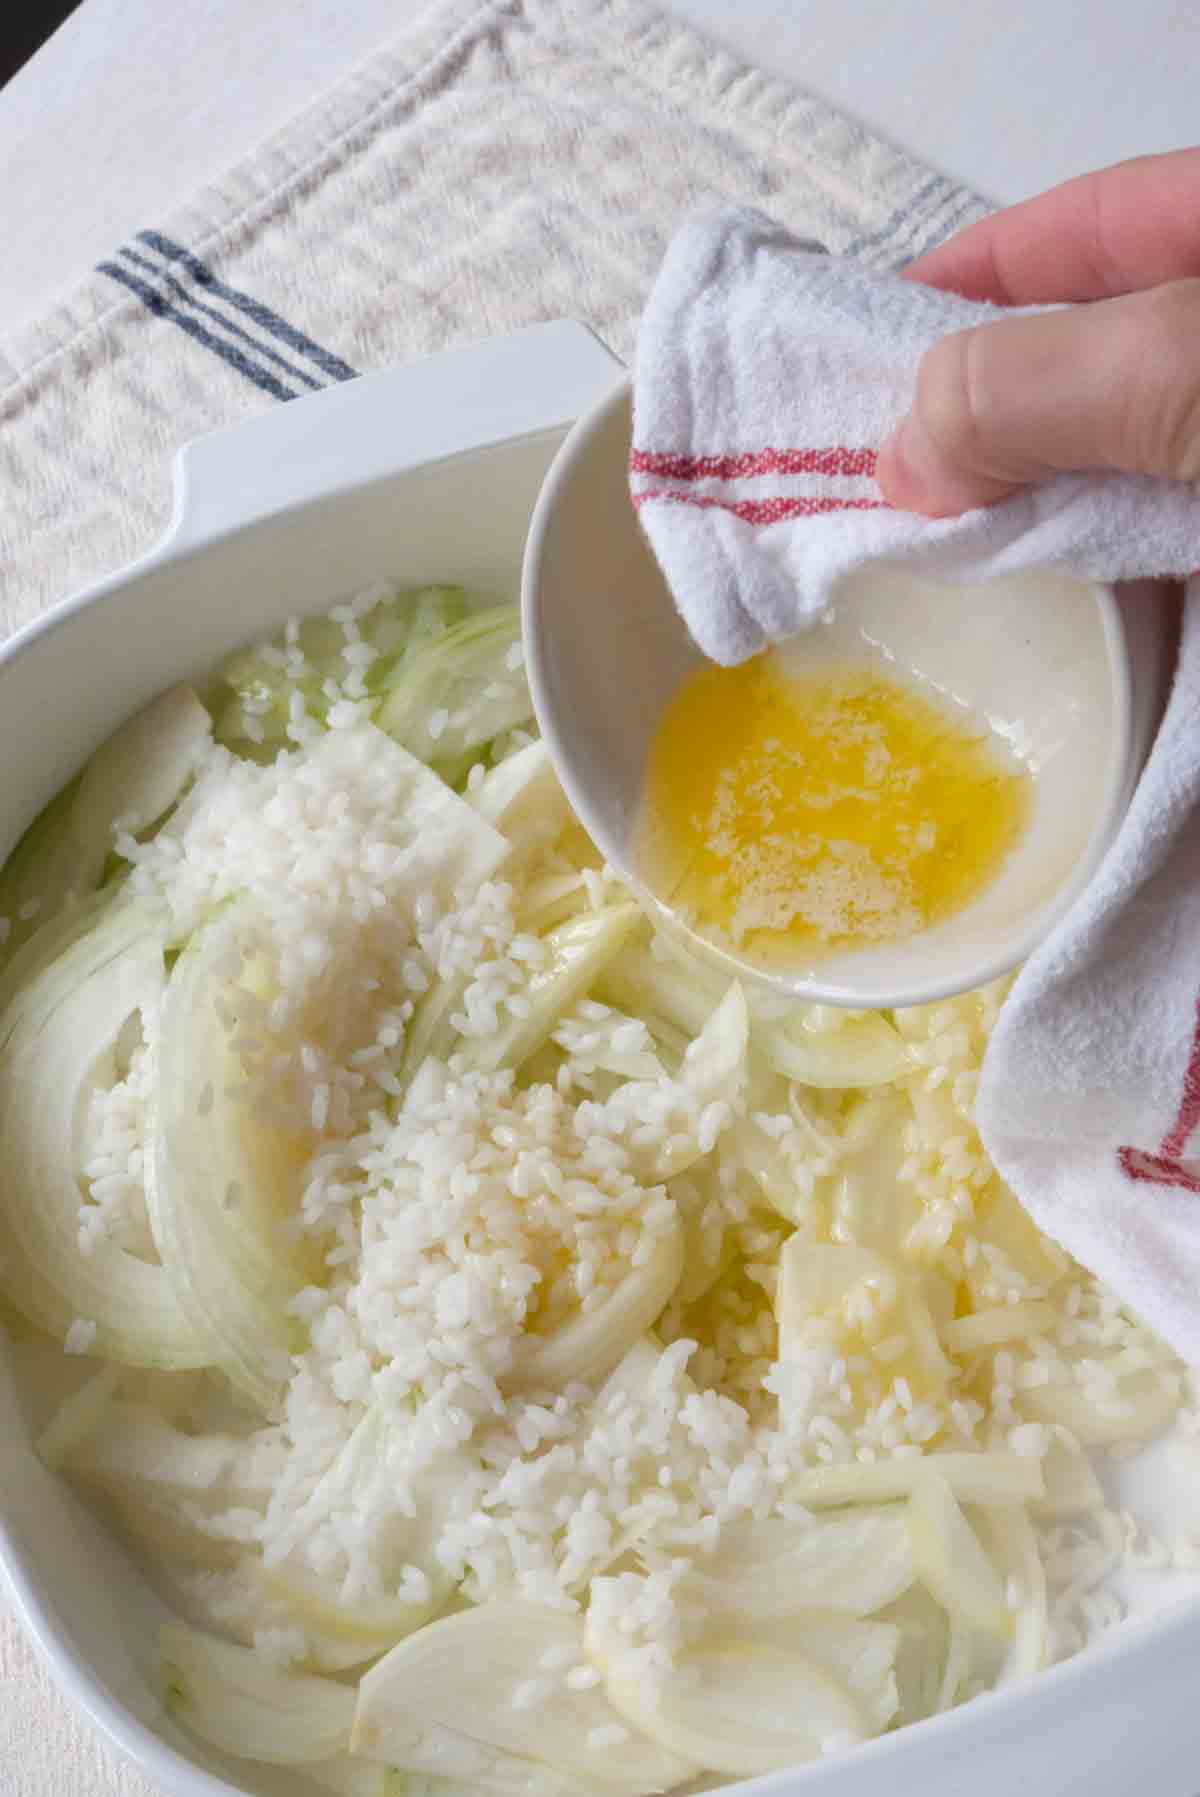 A casserole dish with onion and rice in it being drizzled with melted butter.